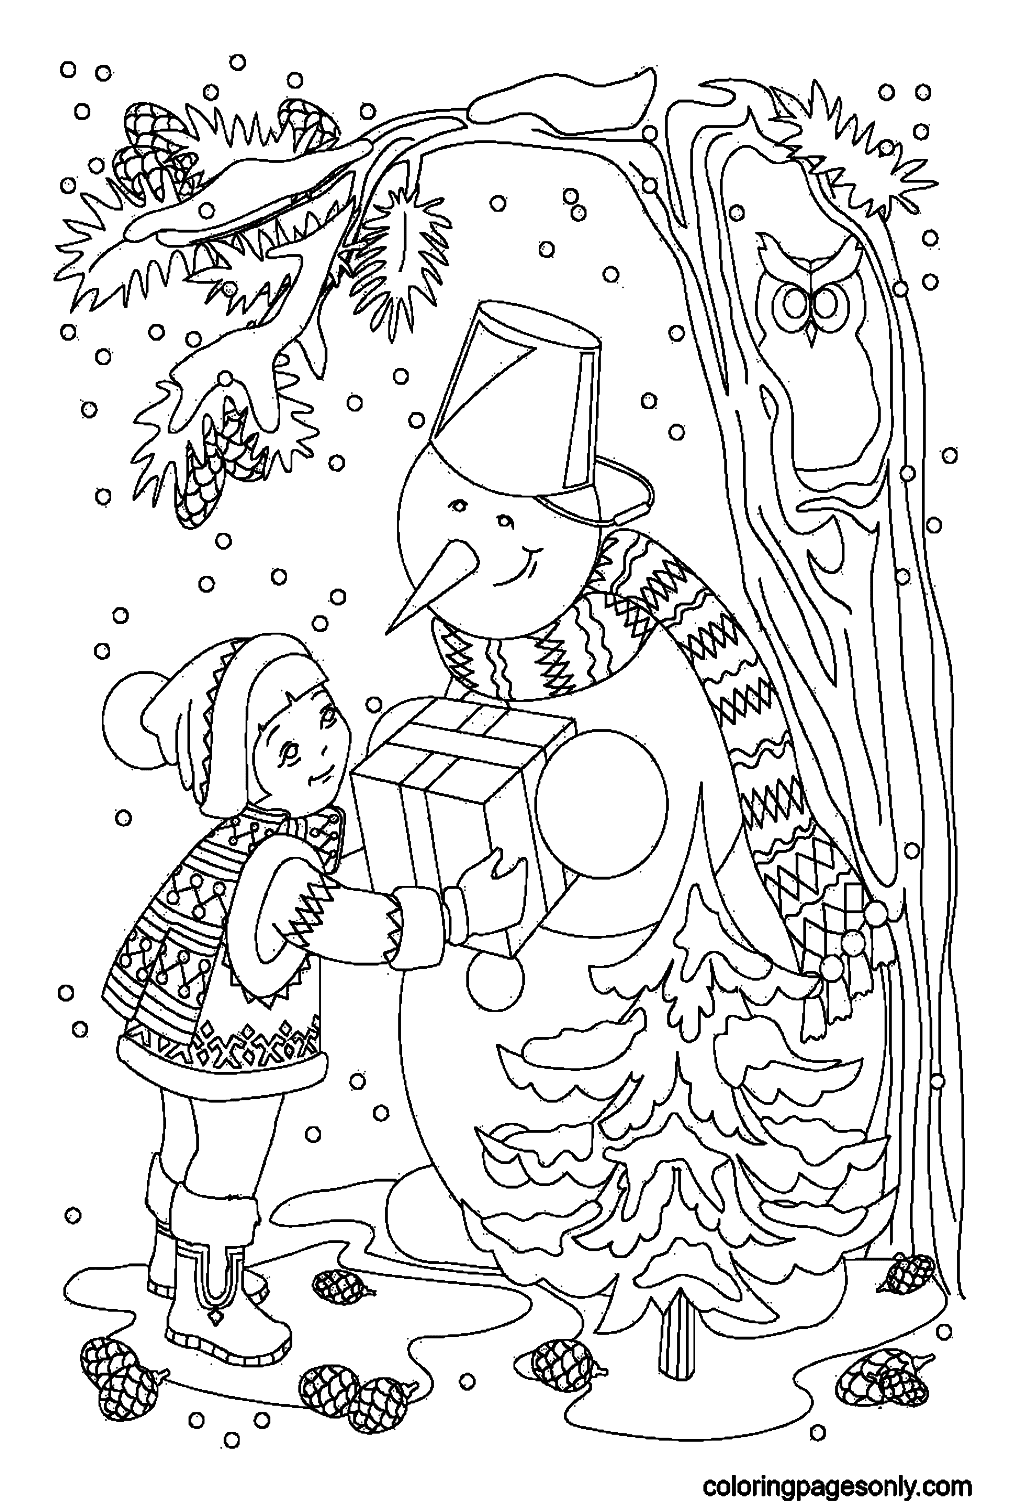 A Little Girl And A Snowman With A Present Coloring Page